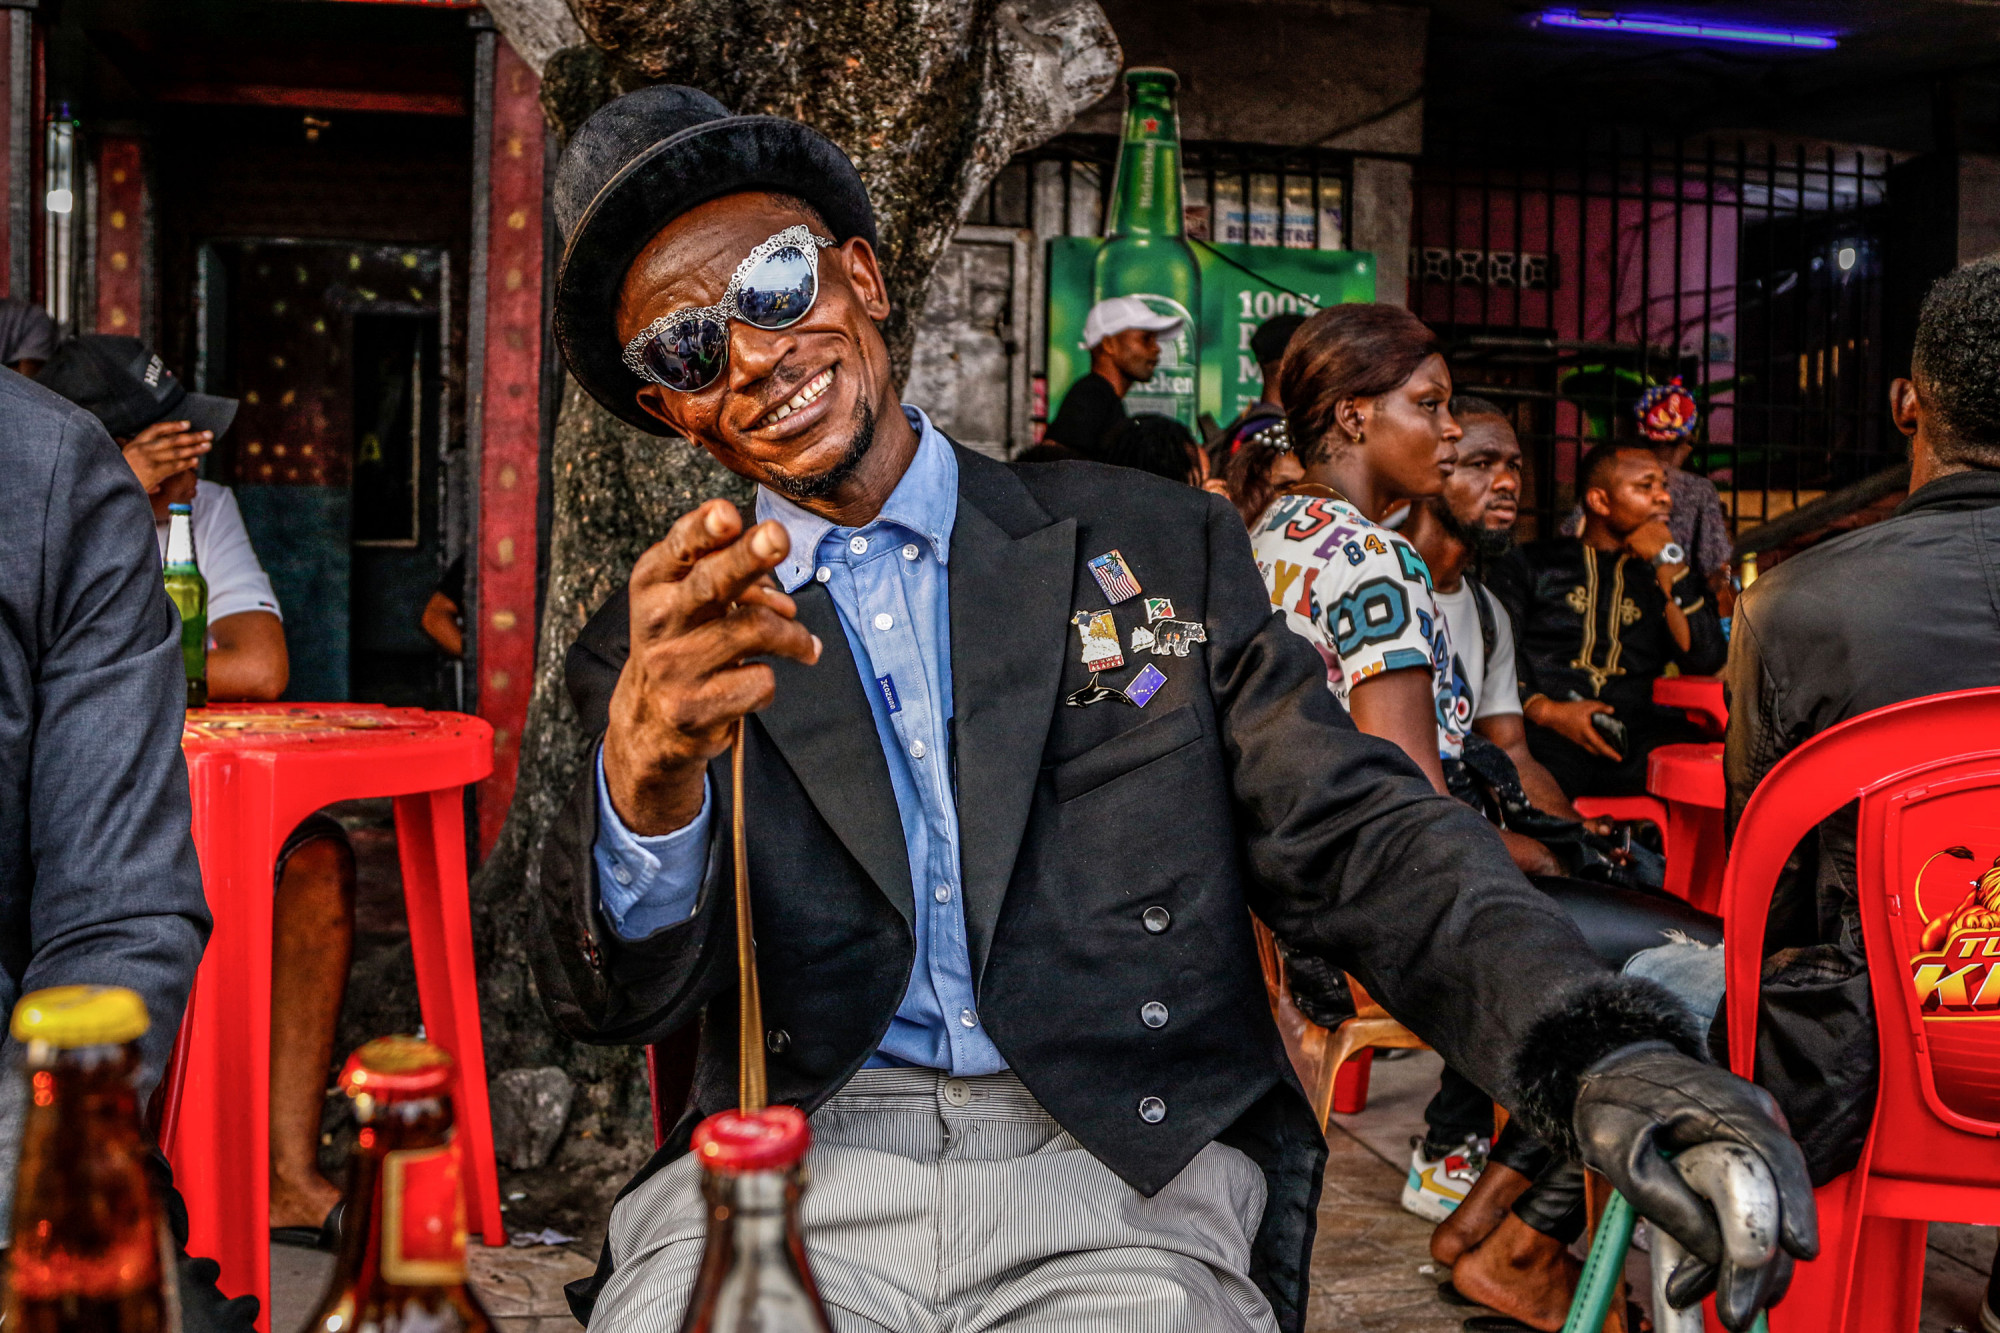 Kinshasa, DRC, February 2021. After gathering at the cemetery the sapeurs moved through town to visit bars in the Matonge neighbourhood. © Justin Makangara for Fondation Carmignac